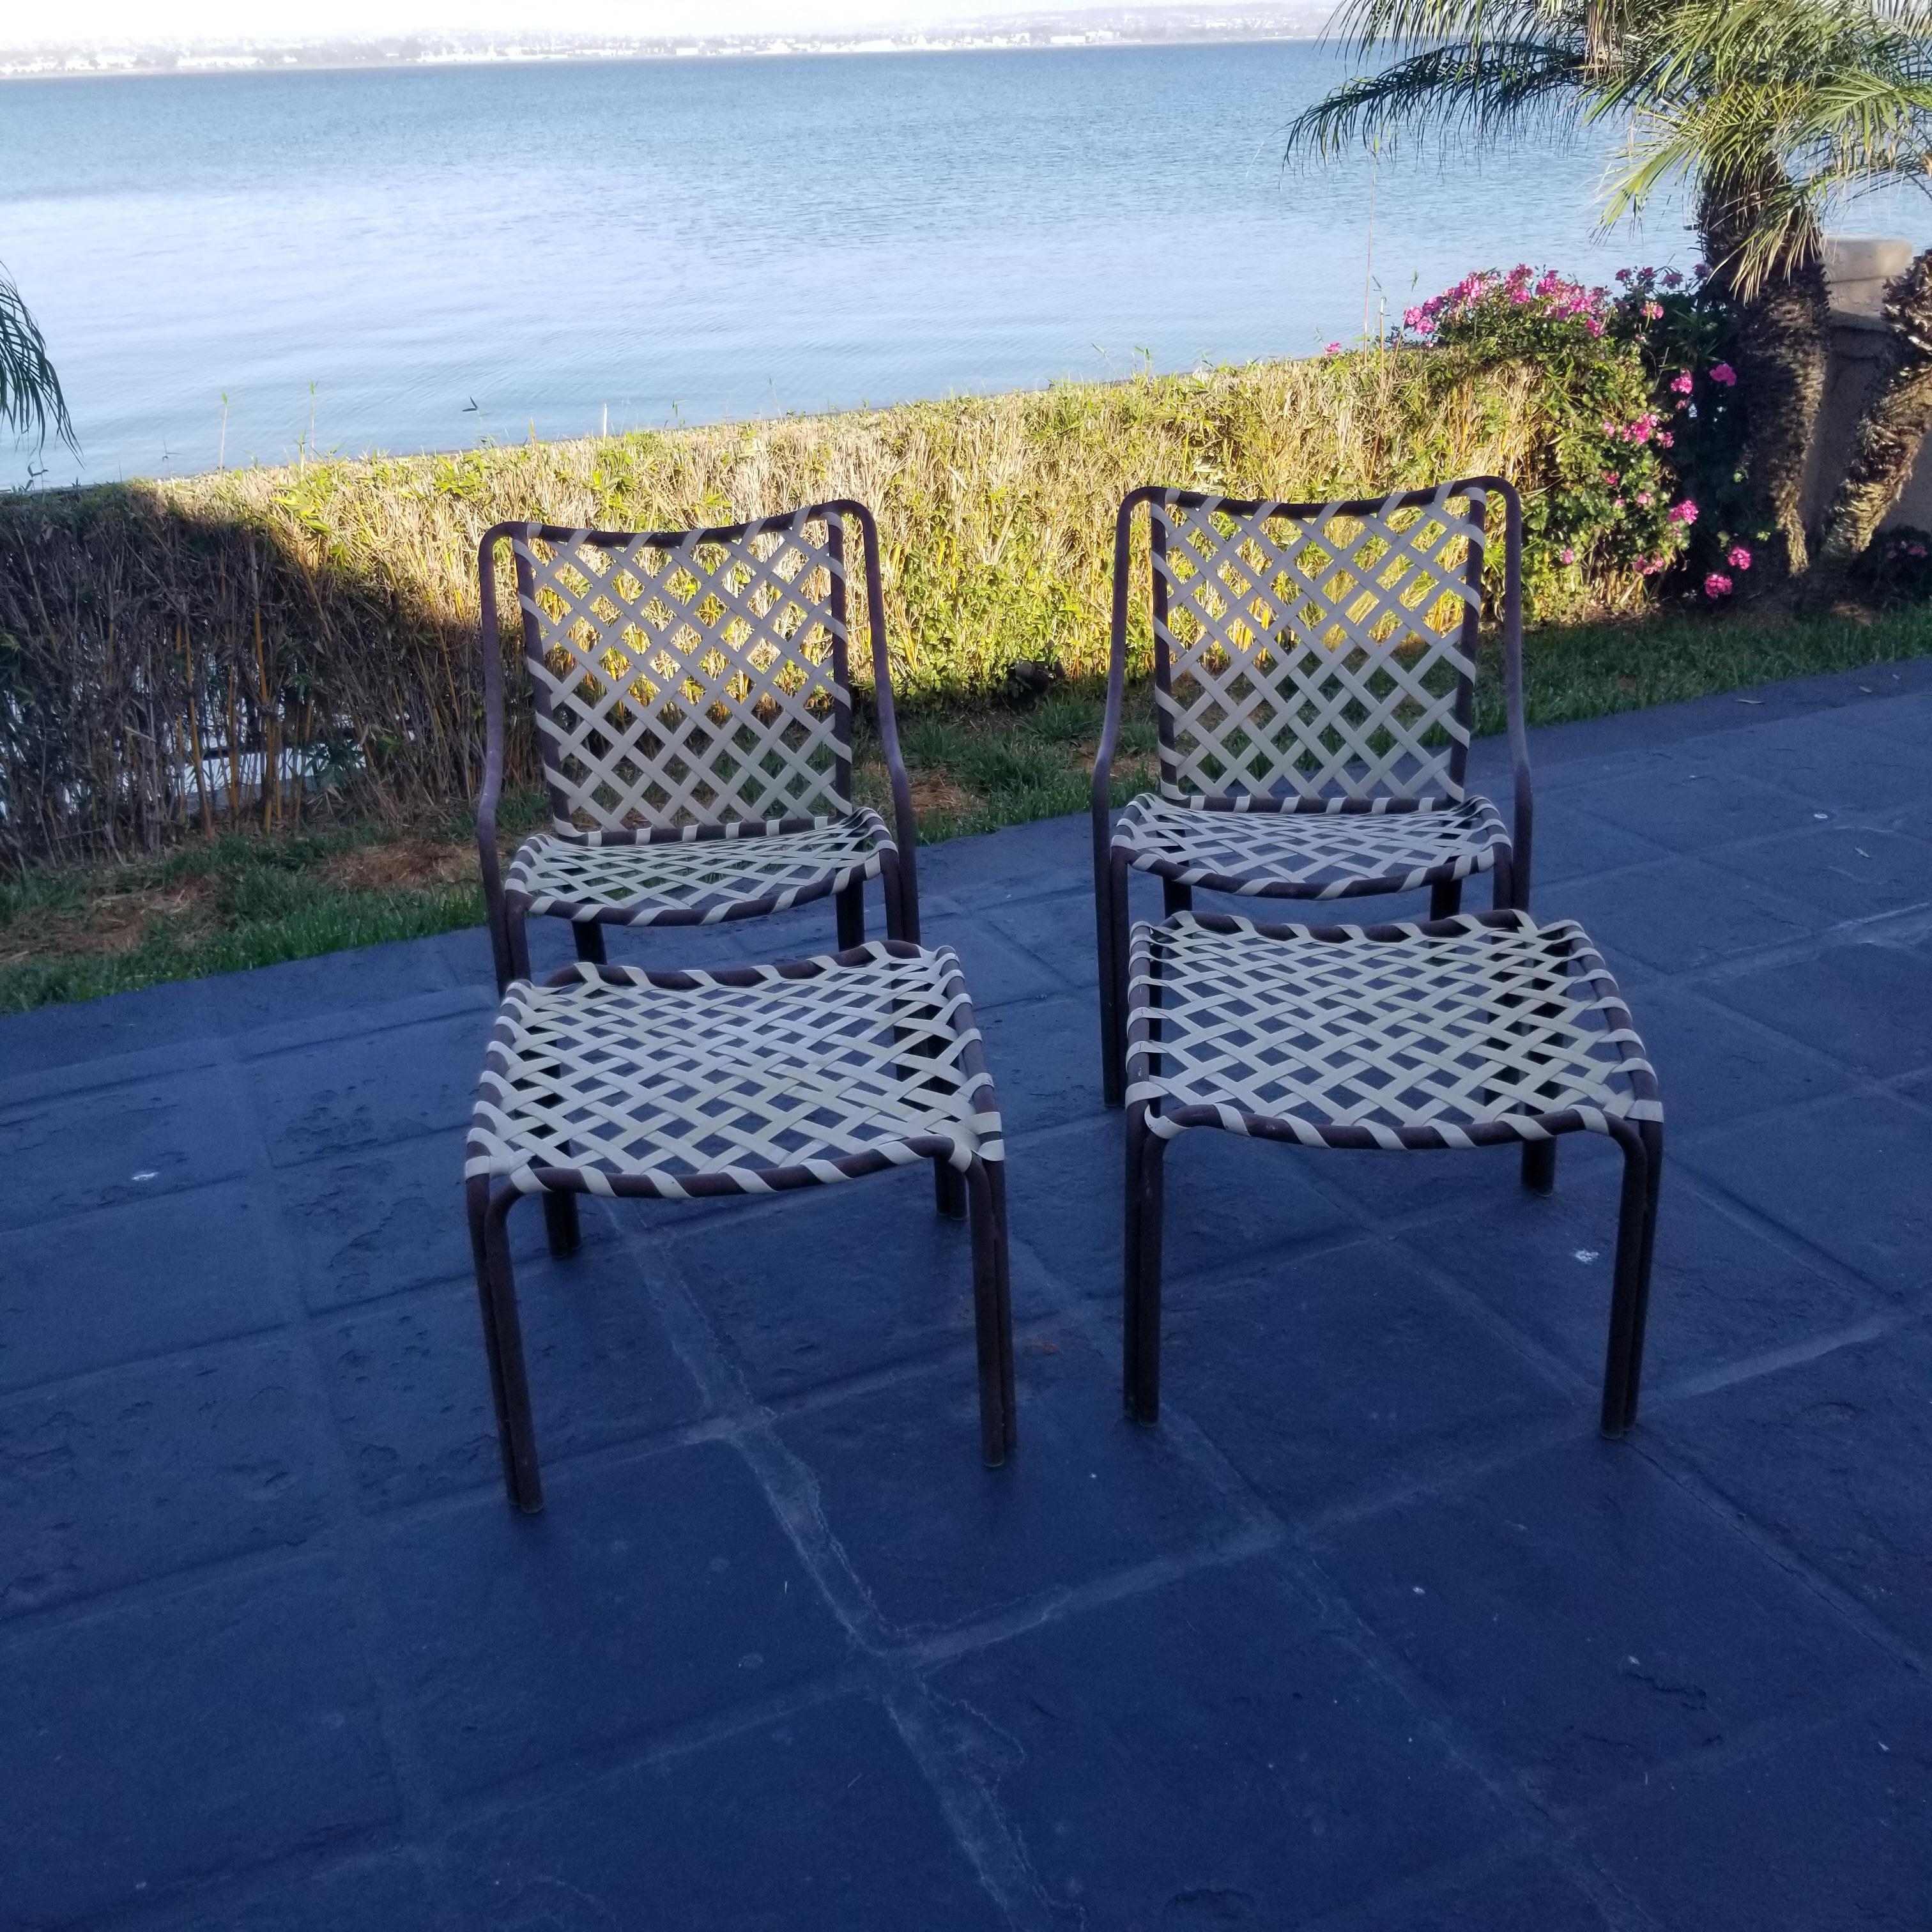 We are presenting:
Mid-Century Modern two patio outdoor lounge chairs with matching ottomans each chair
Brown and yellowed white straps
Style Tamiami by Brown Jordan Aluminum lightweight Patio chairs modern mid century.
Measures approximately;